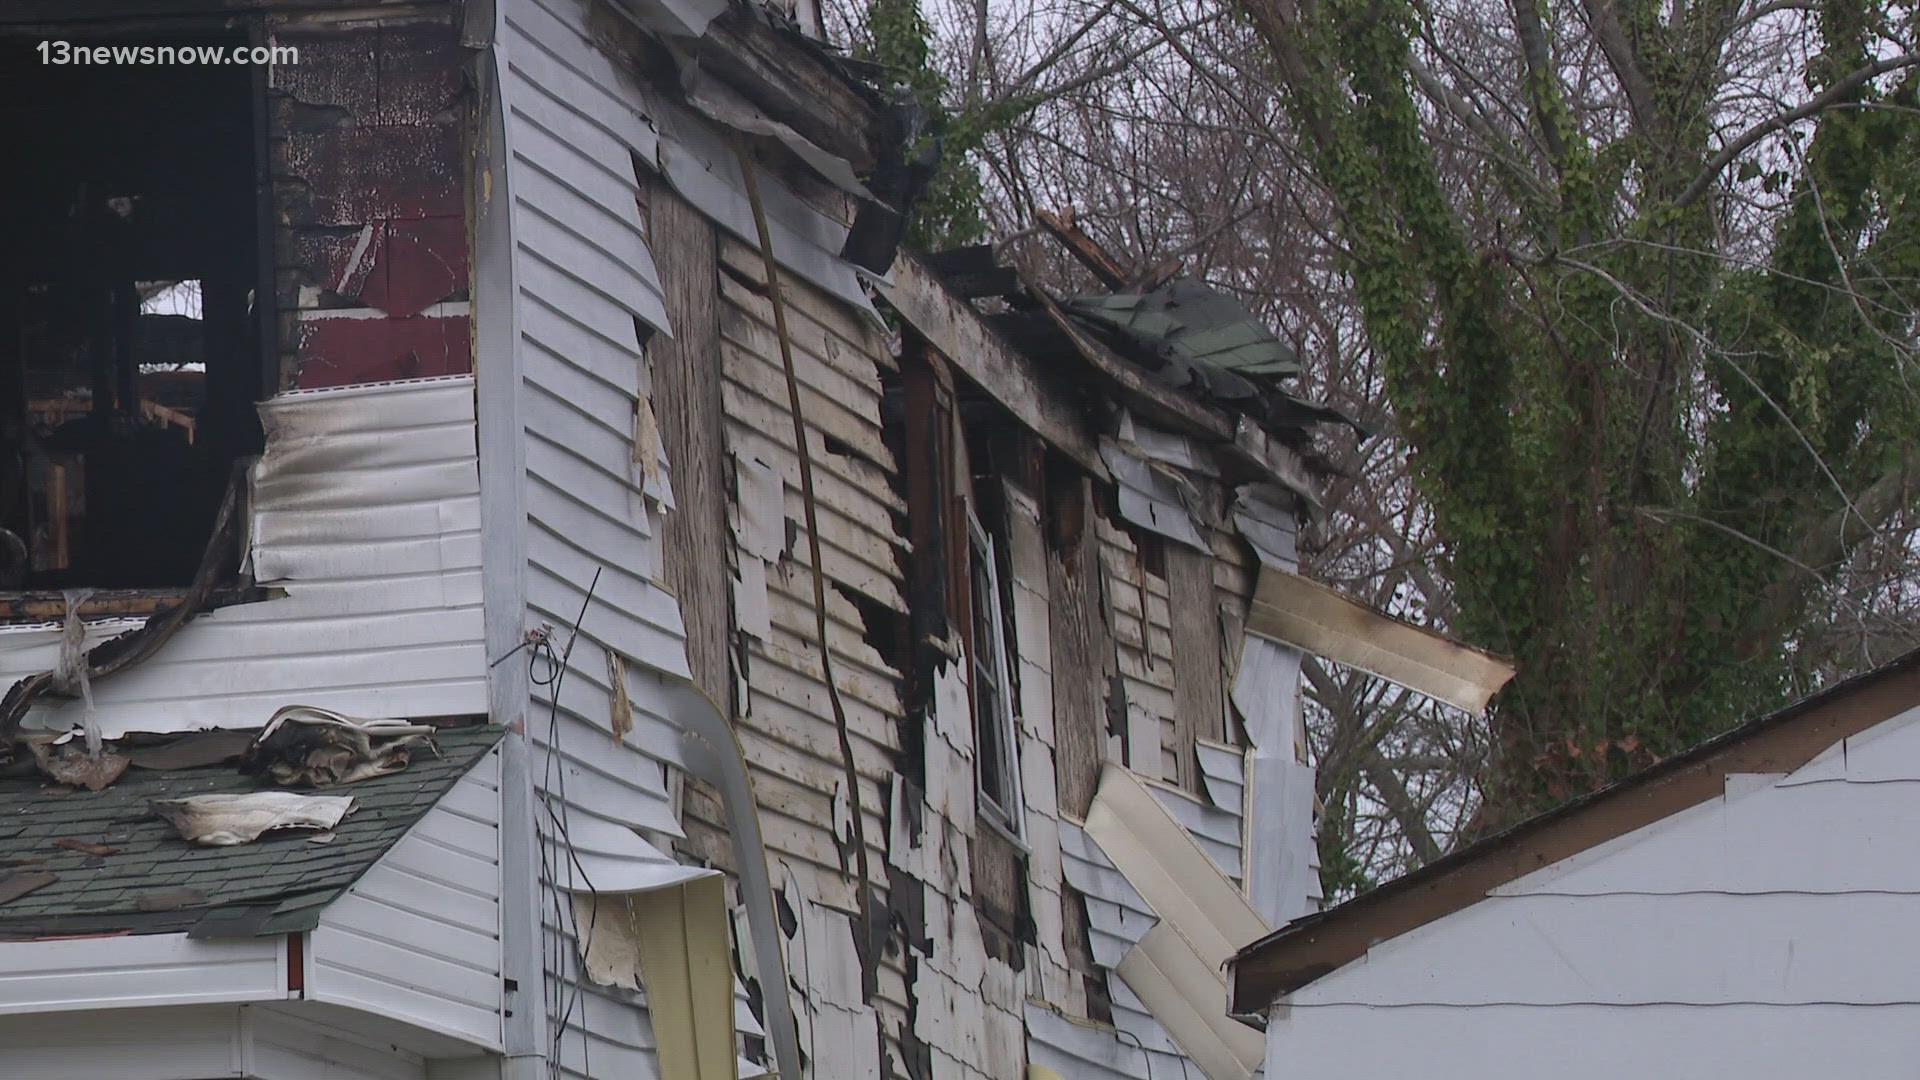 One fire happened on Andrew Place, while a person died in another fire on Hampton Avenue early Sunday morning.